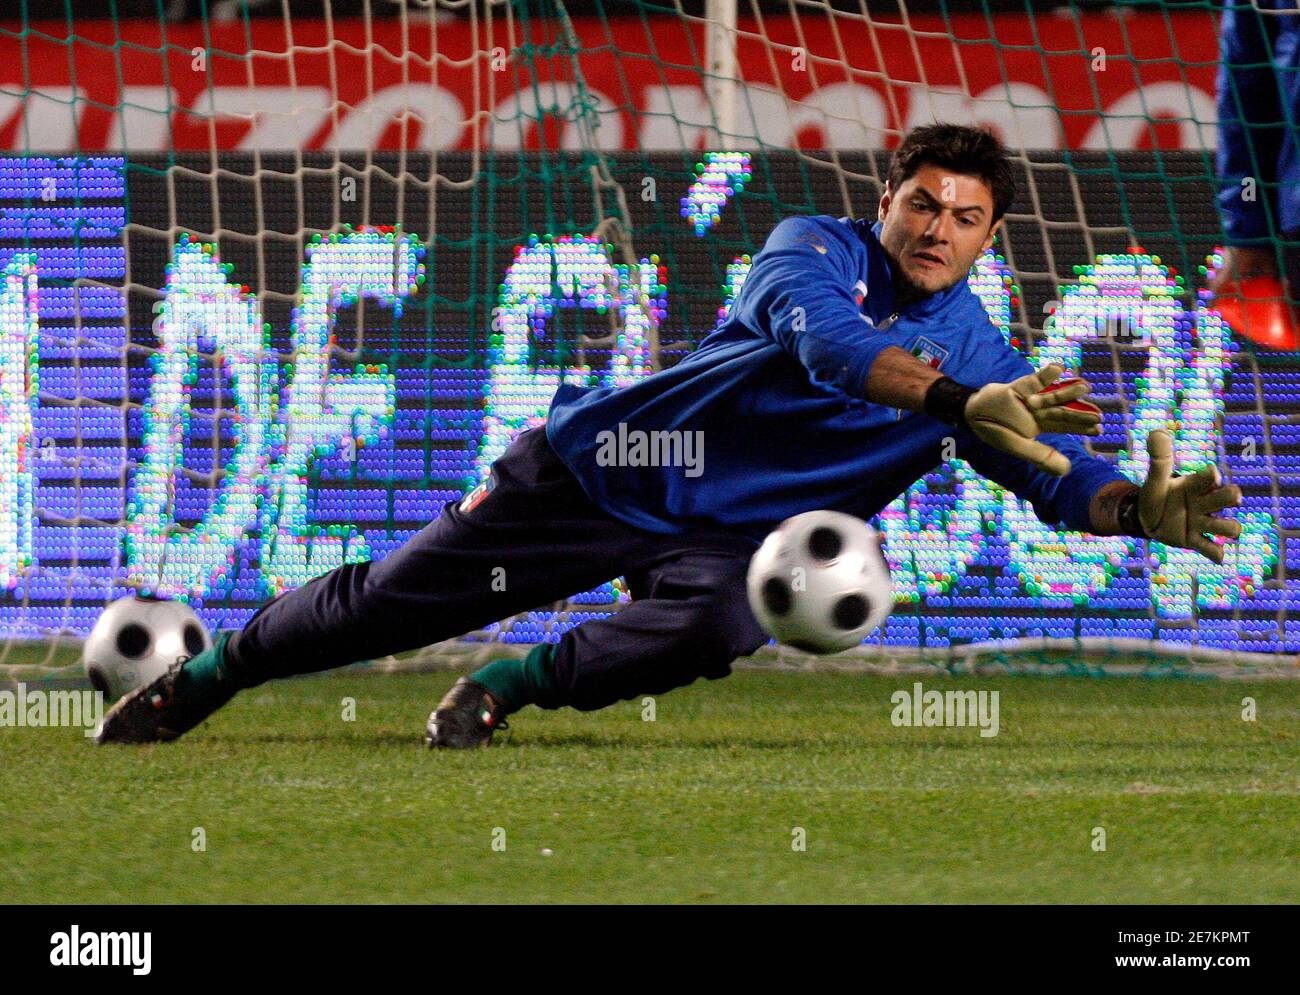 Italy's goalkeeper Marco Amelia dives for the ball before their  international friendly soccer match against Spain